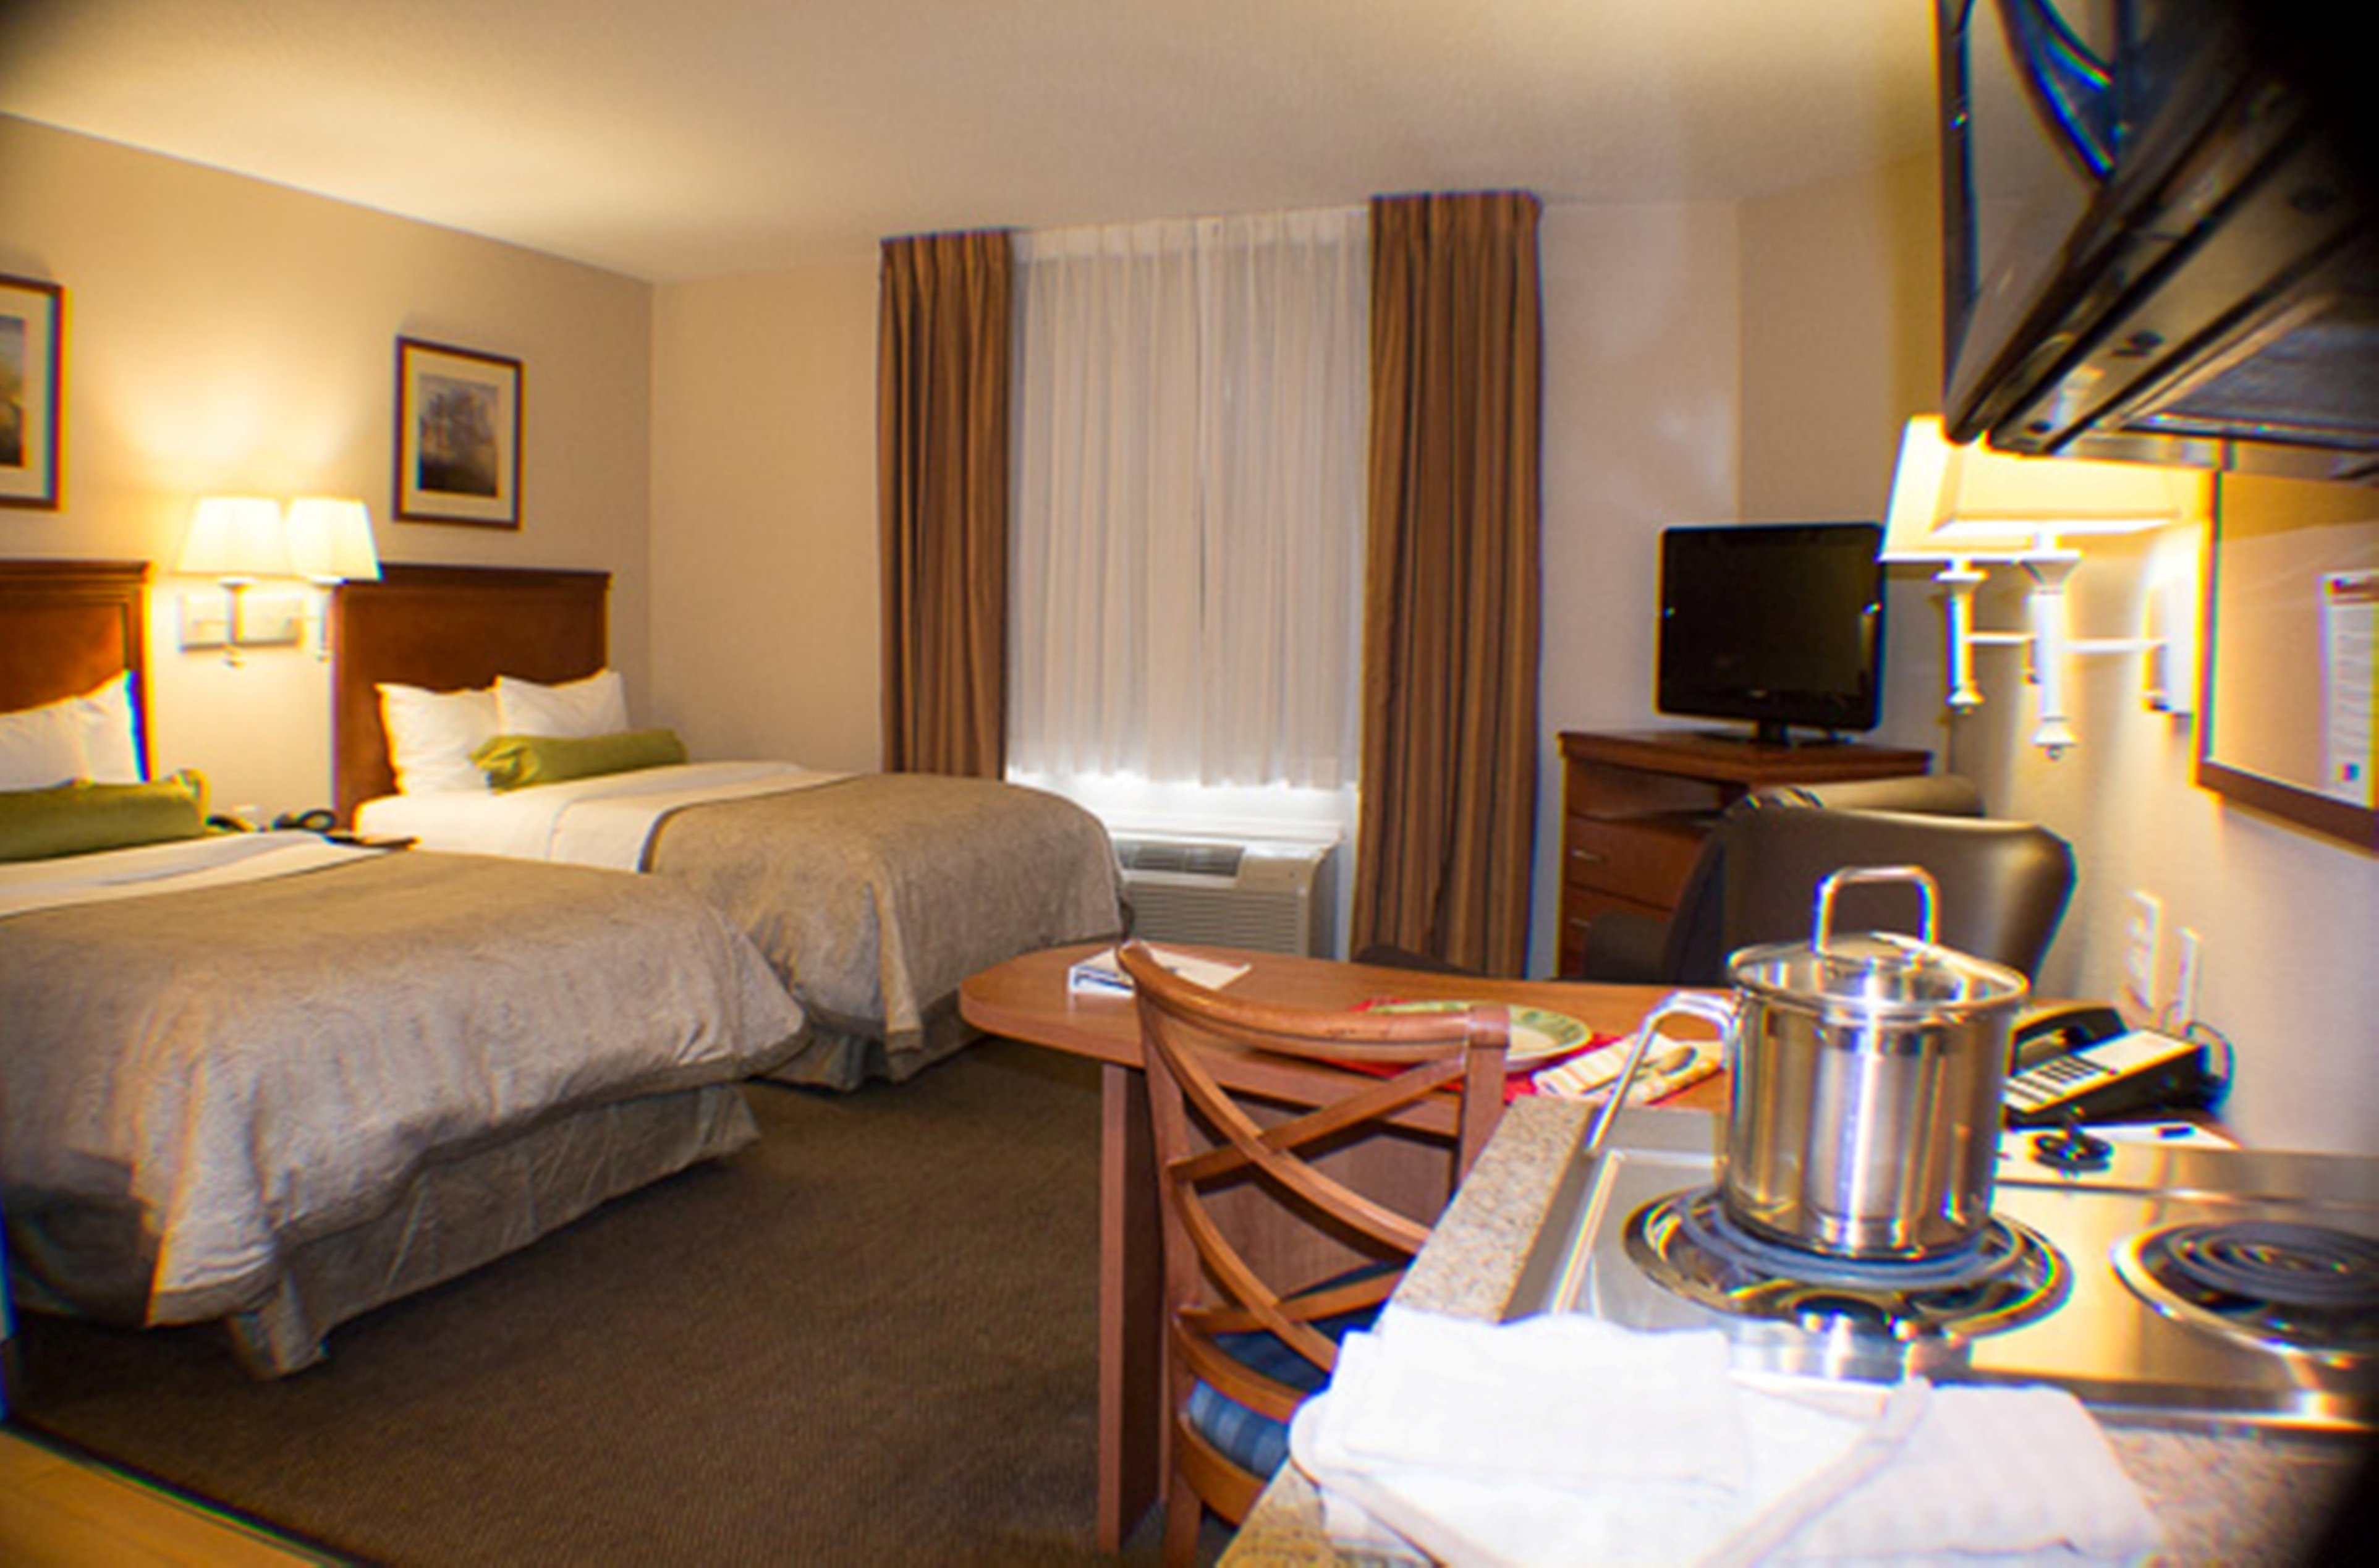 Studio Suites Two Full Size beds